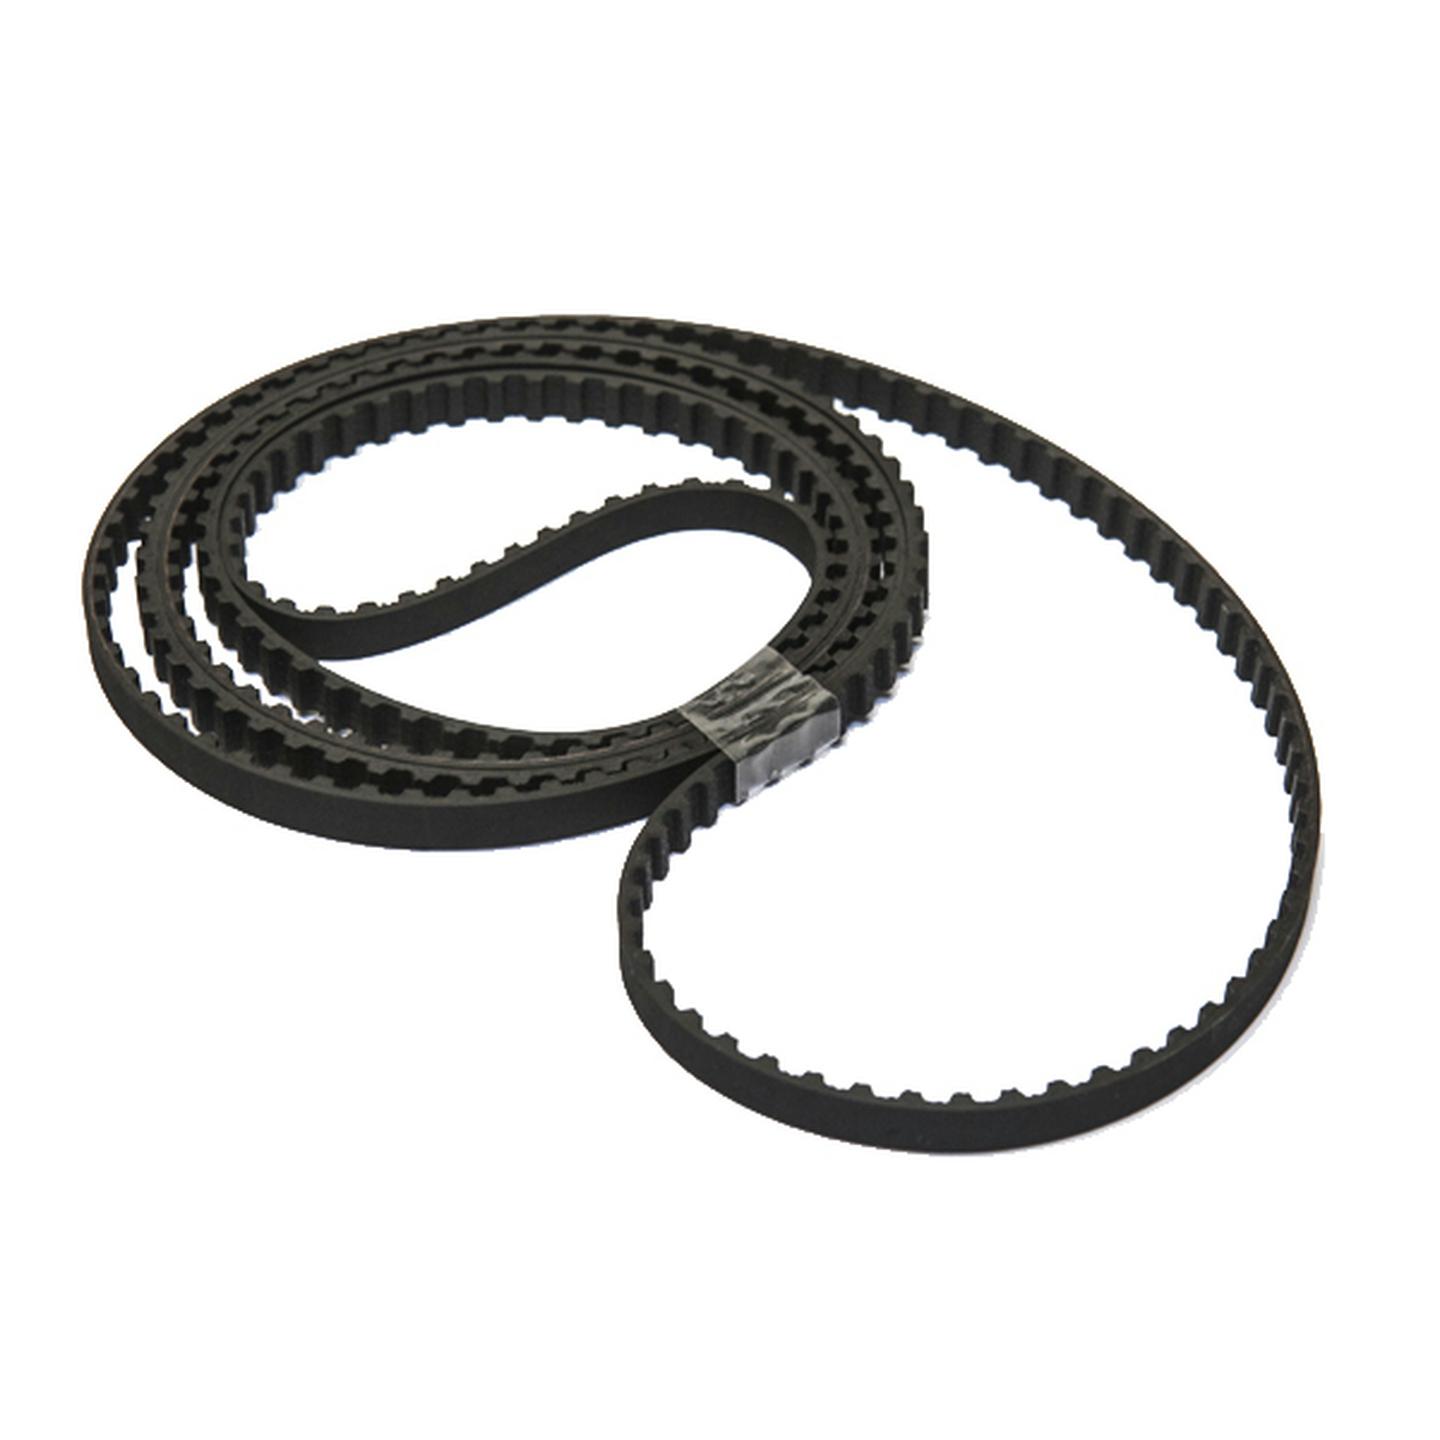 Rubber Toothed Belt to suit TL-4020 3D Printer - 1.5m